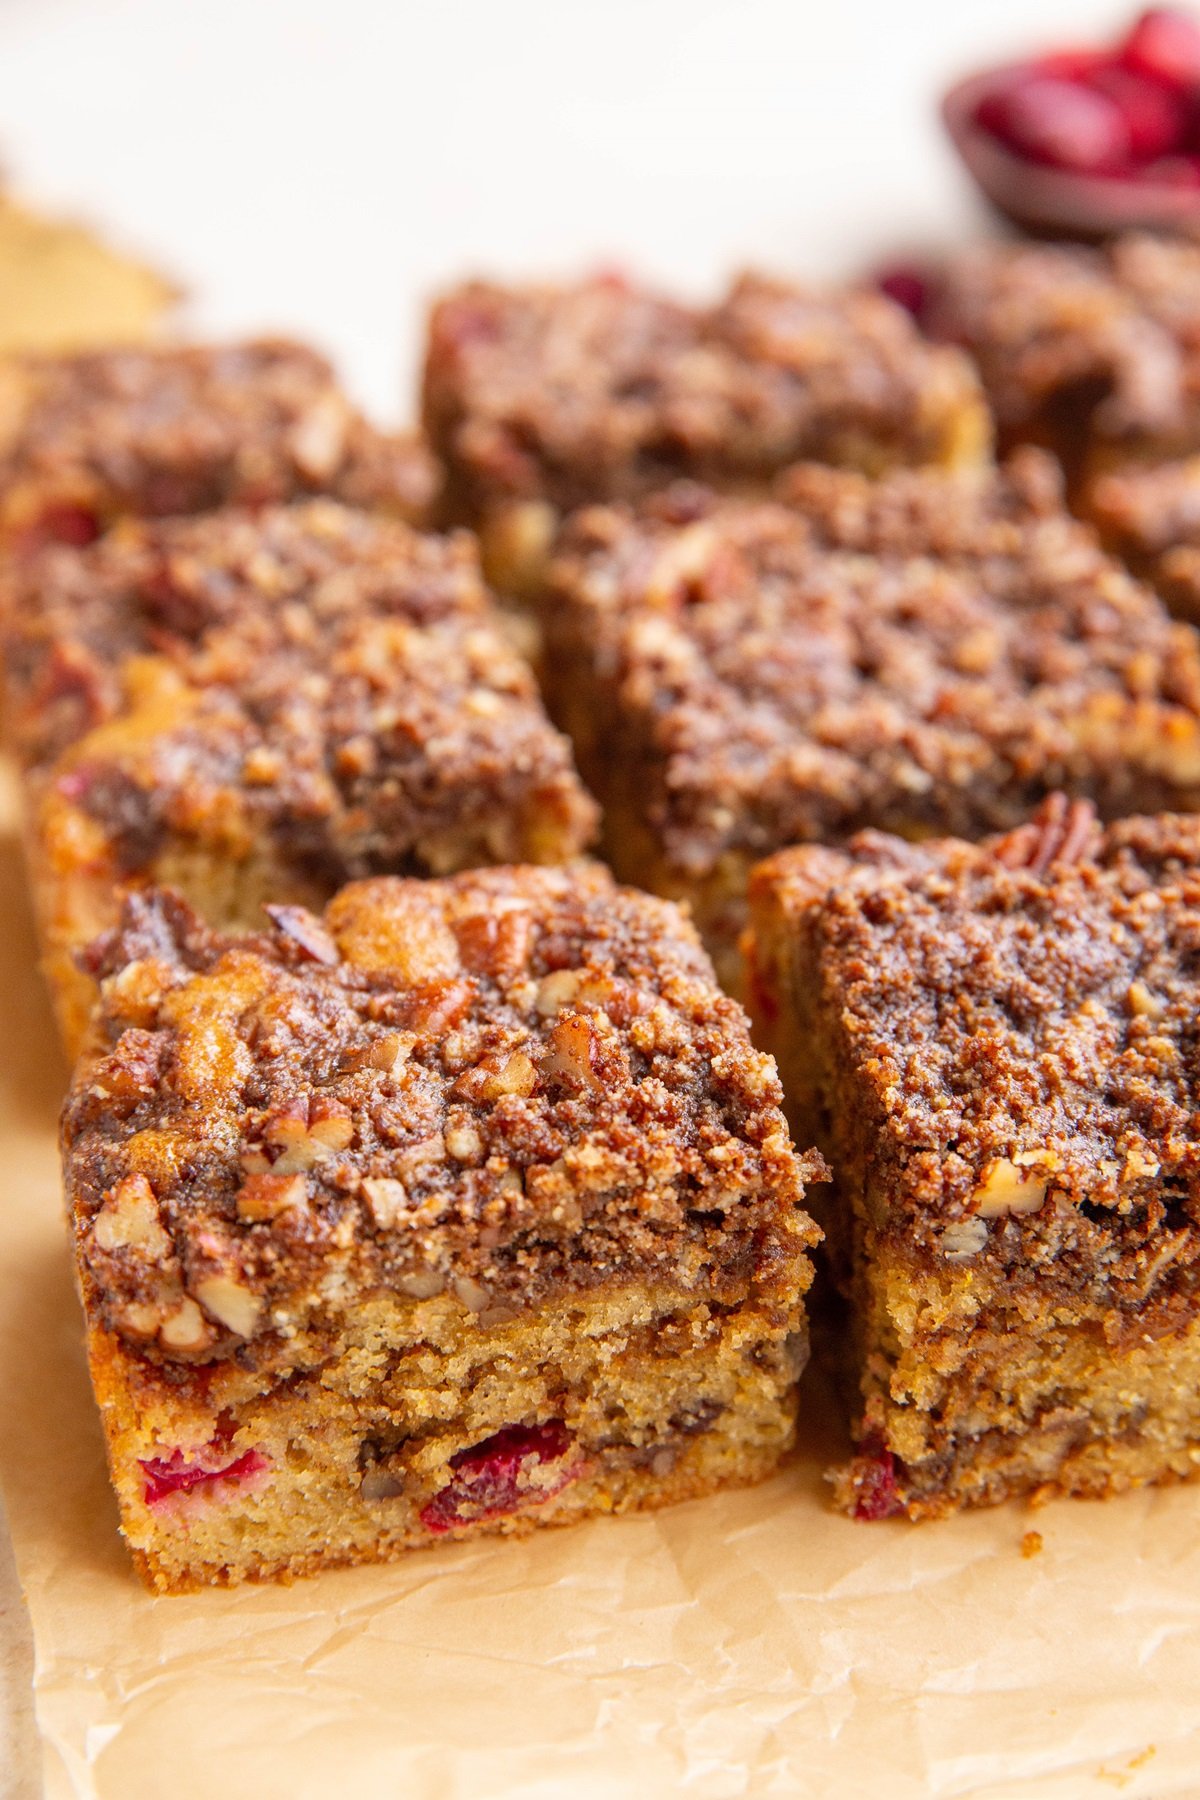 Grain-free cranberry orange coffee cake cut into slices on a sheet of parchment paper